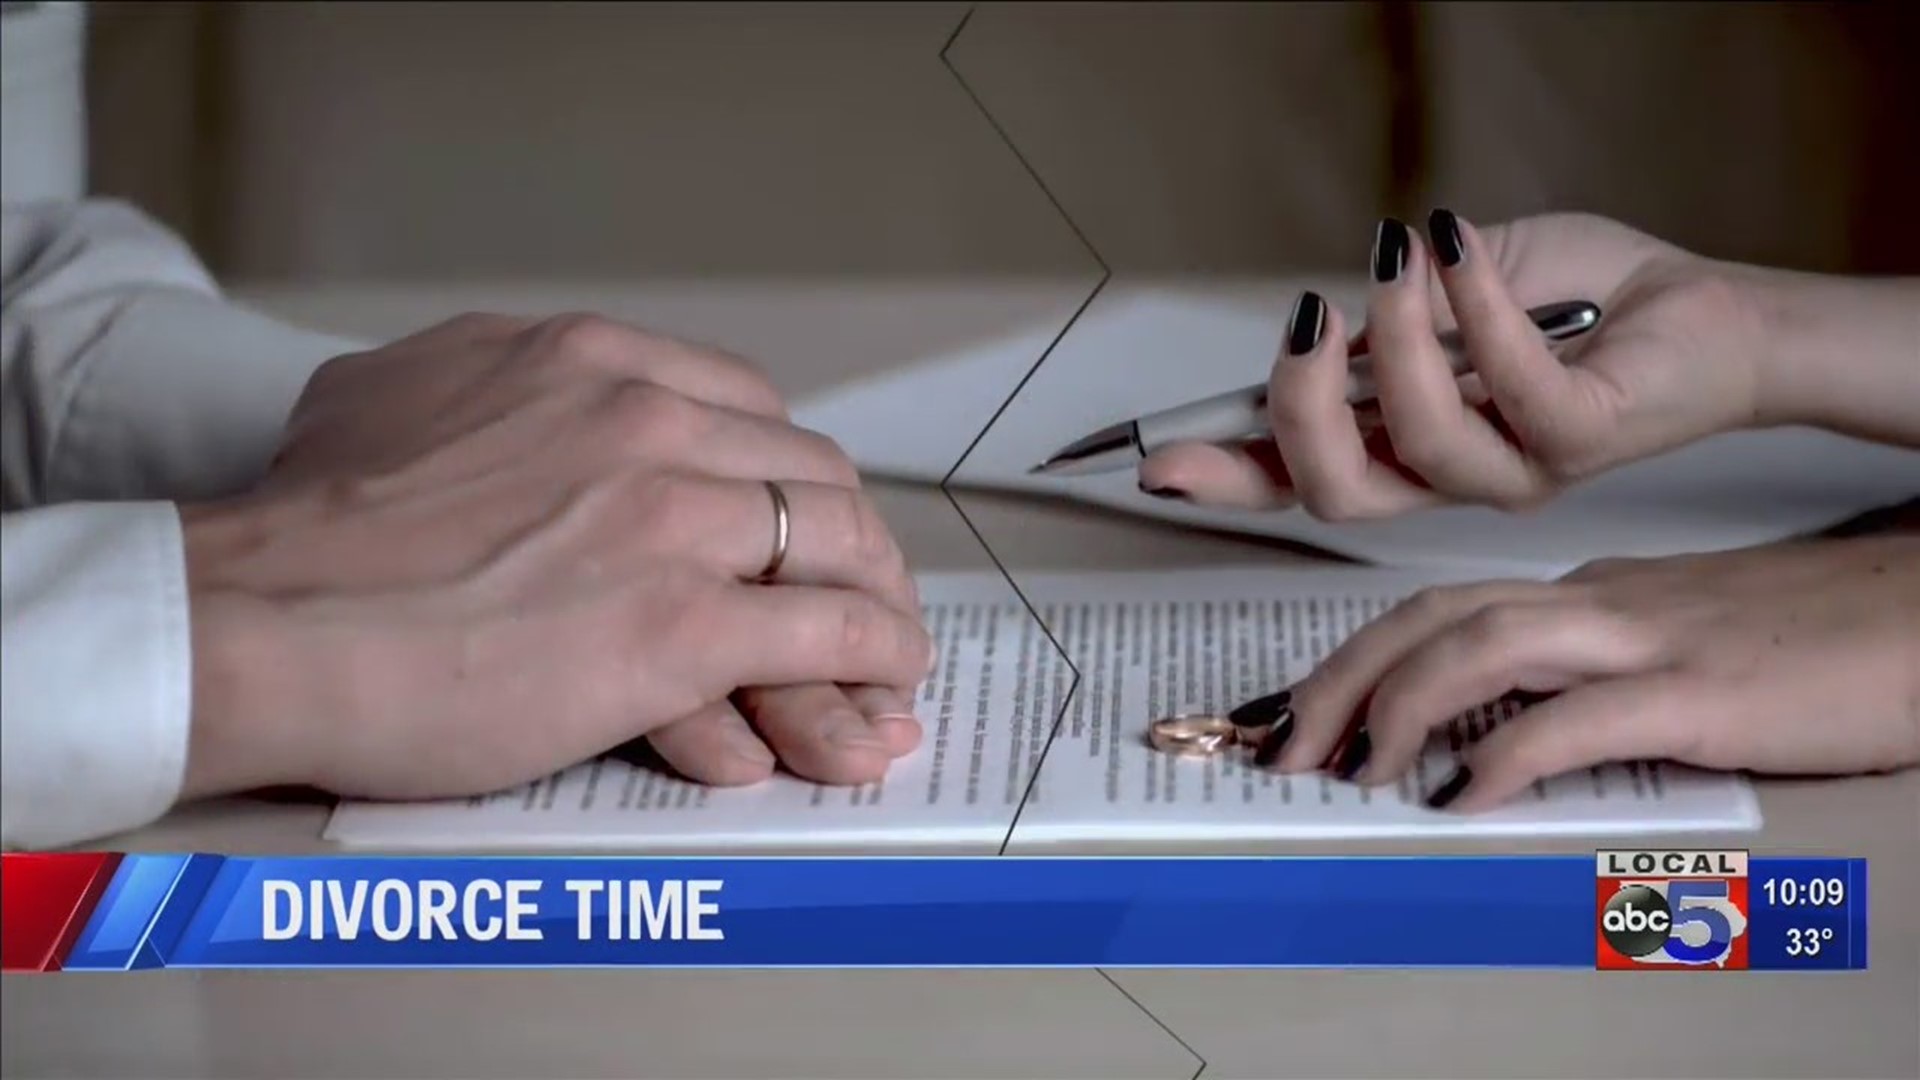 Divorce Time: January sees spike in divorces nationwide